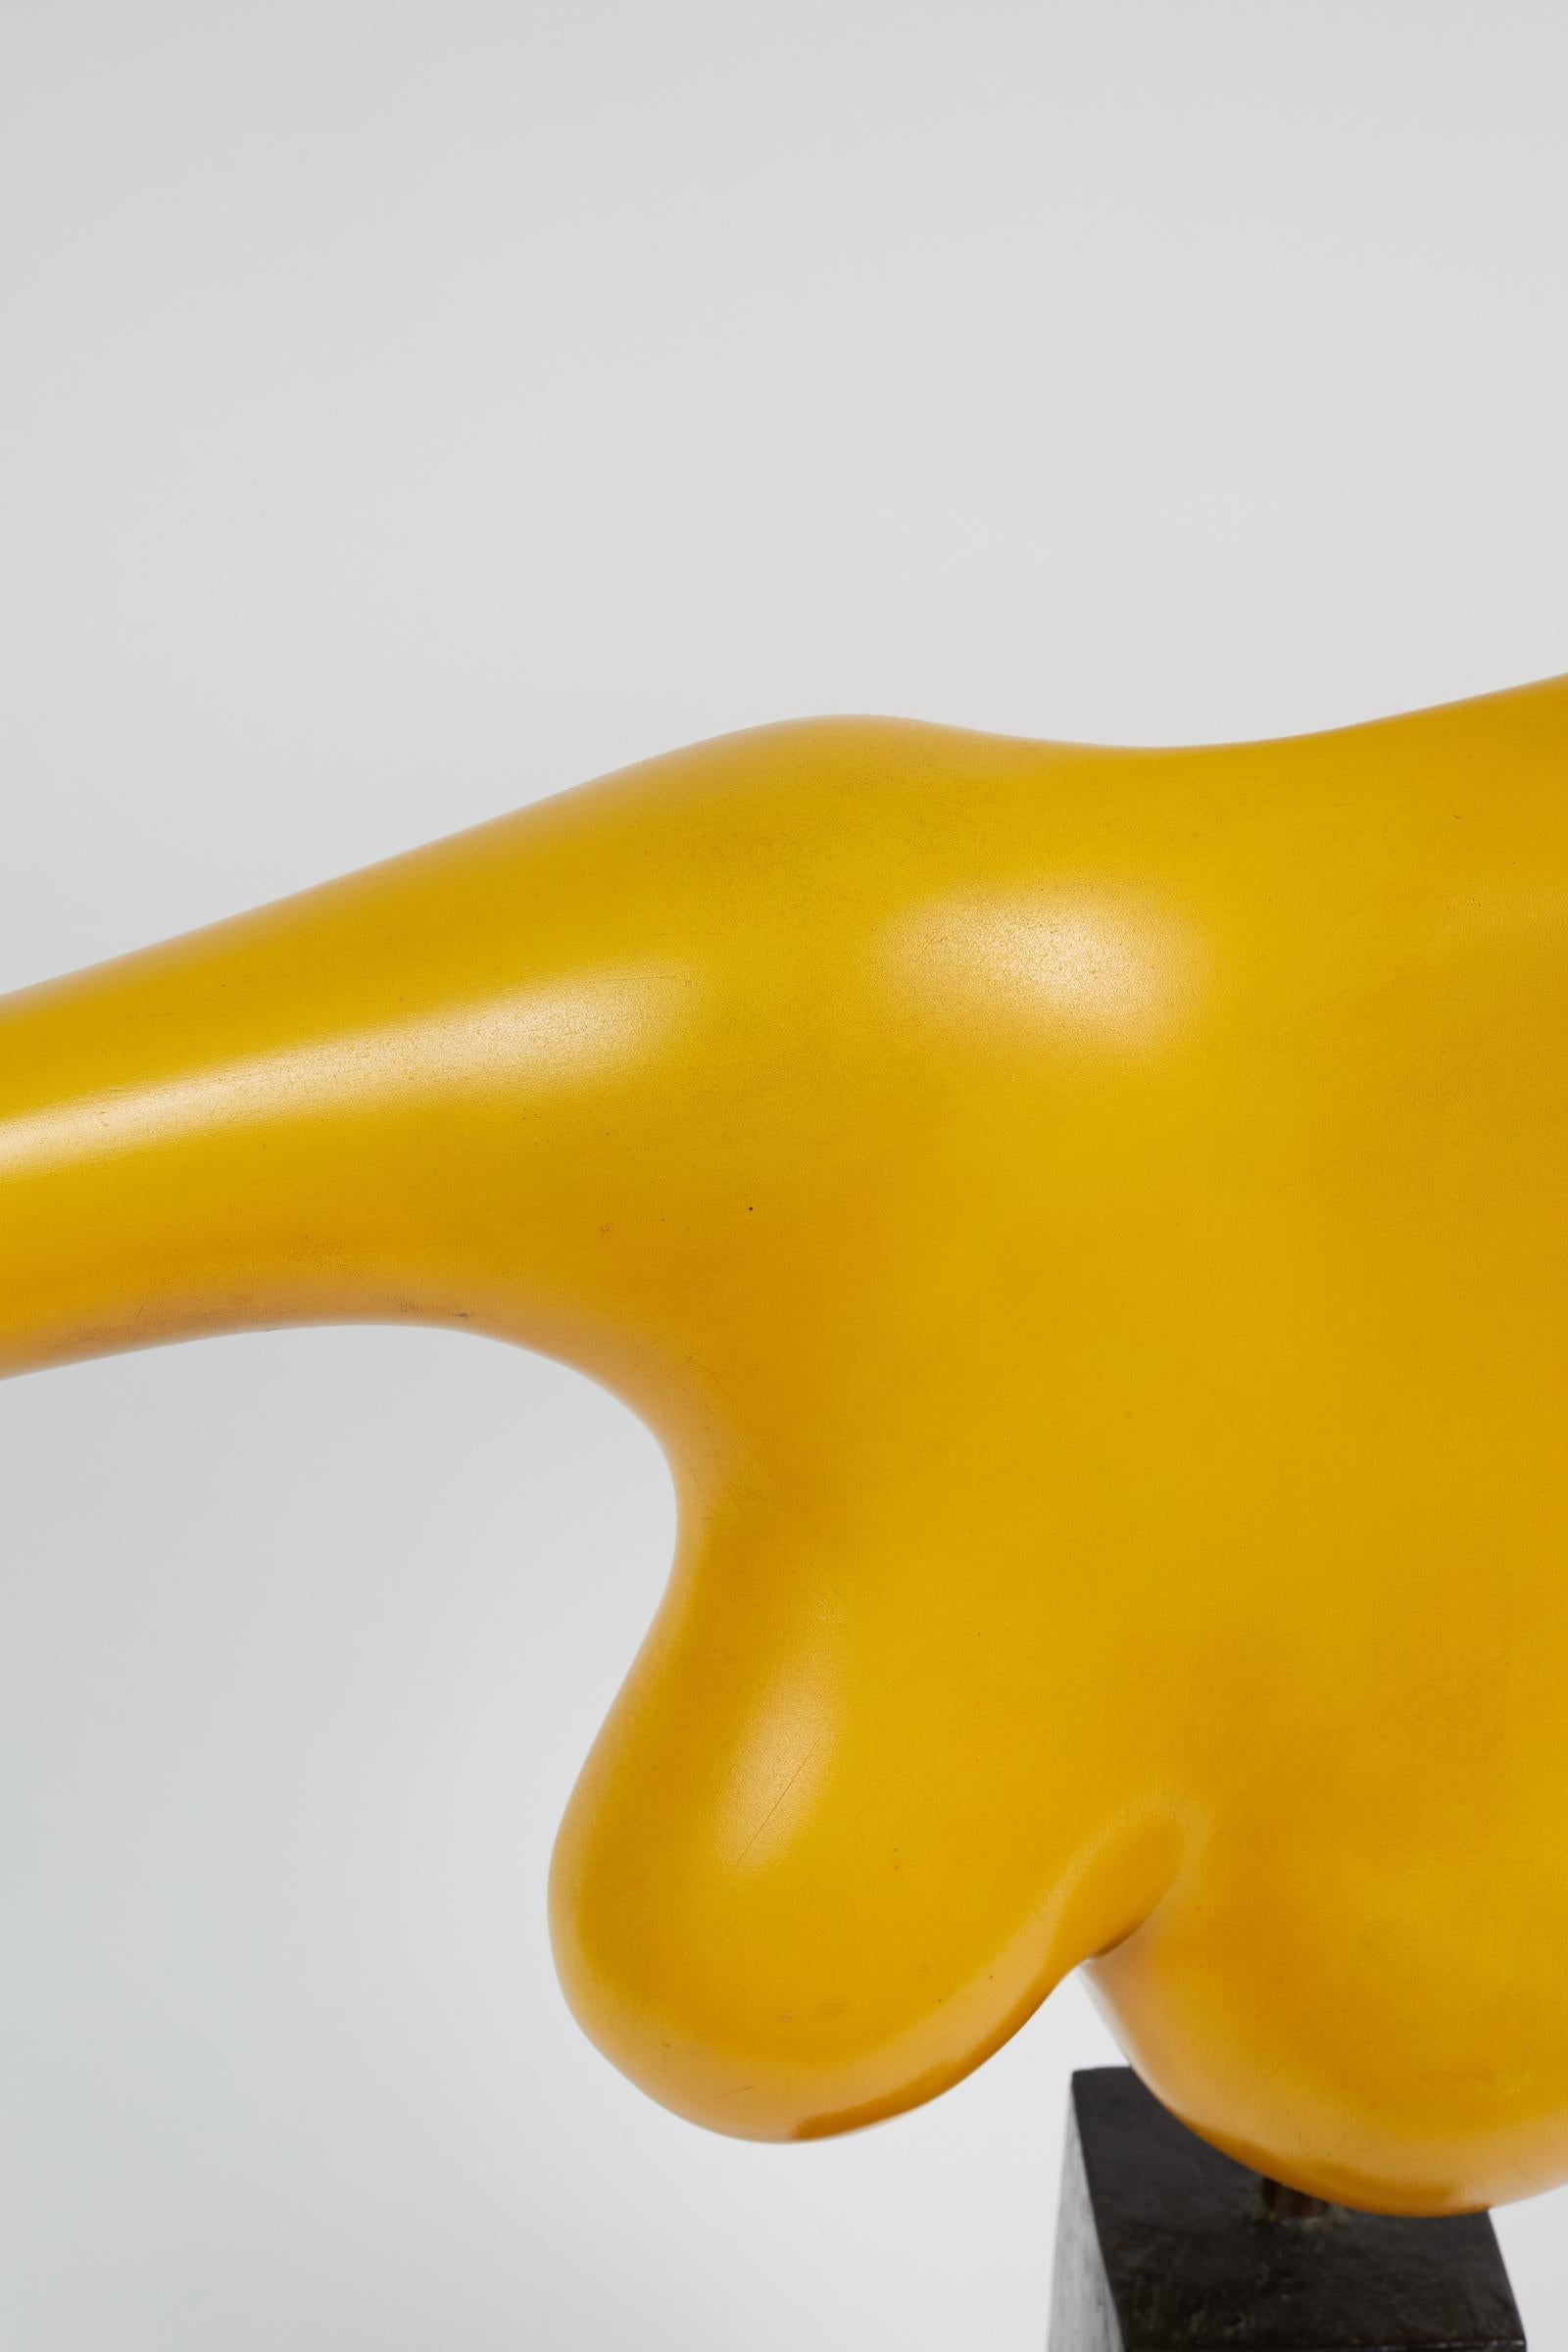 Canadian Vibrant Yellow Painted Resin Sculpture by Henry Wanton Jones